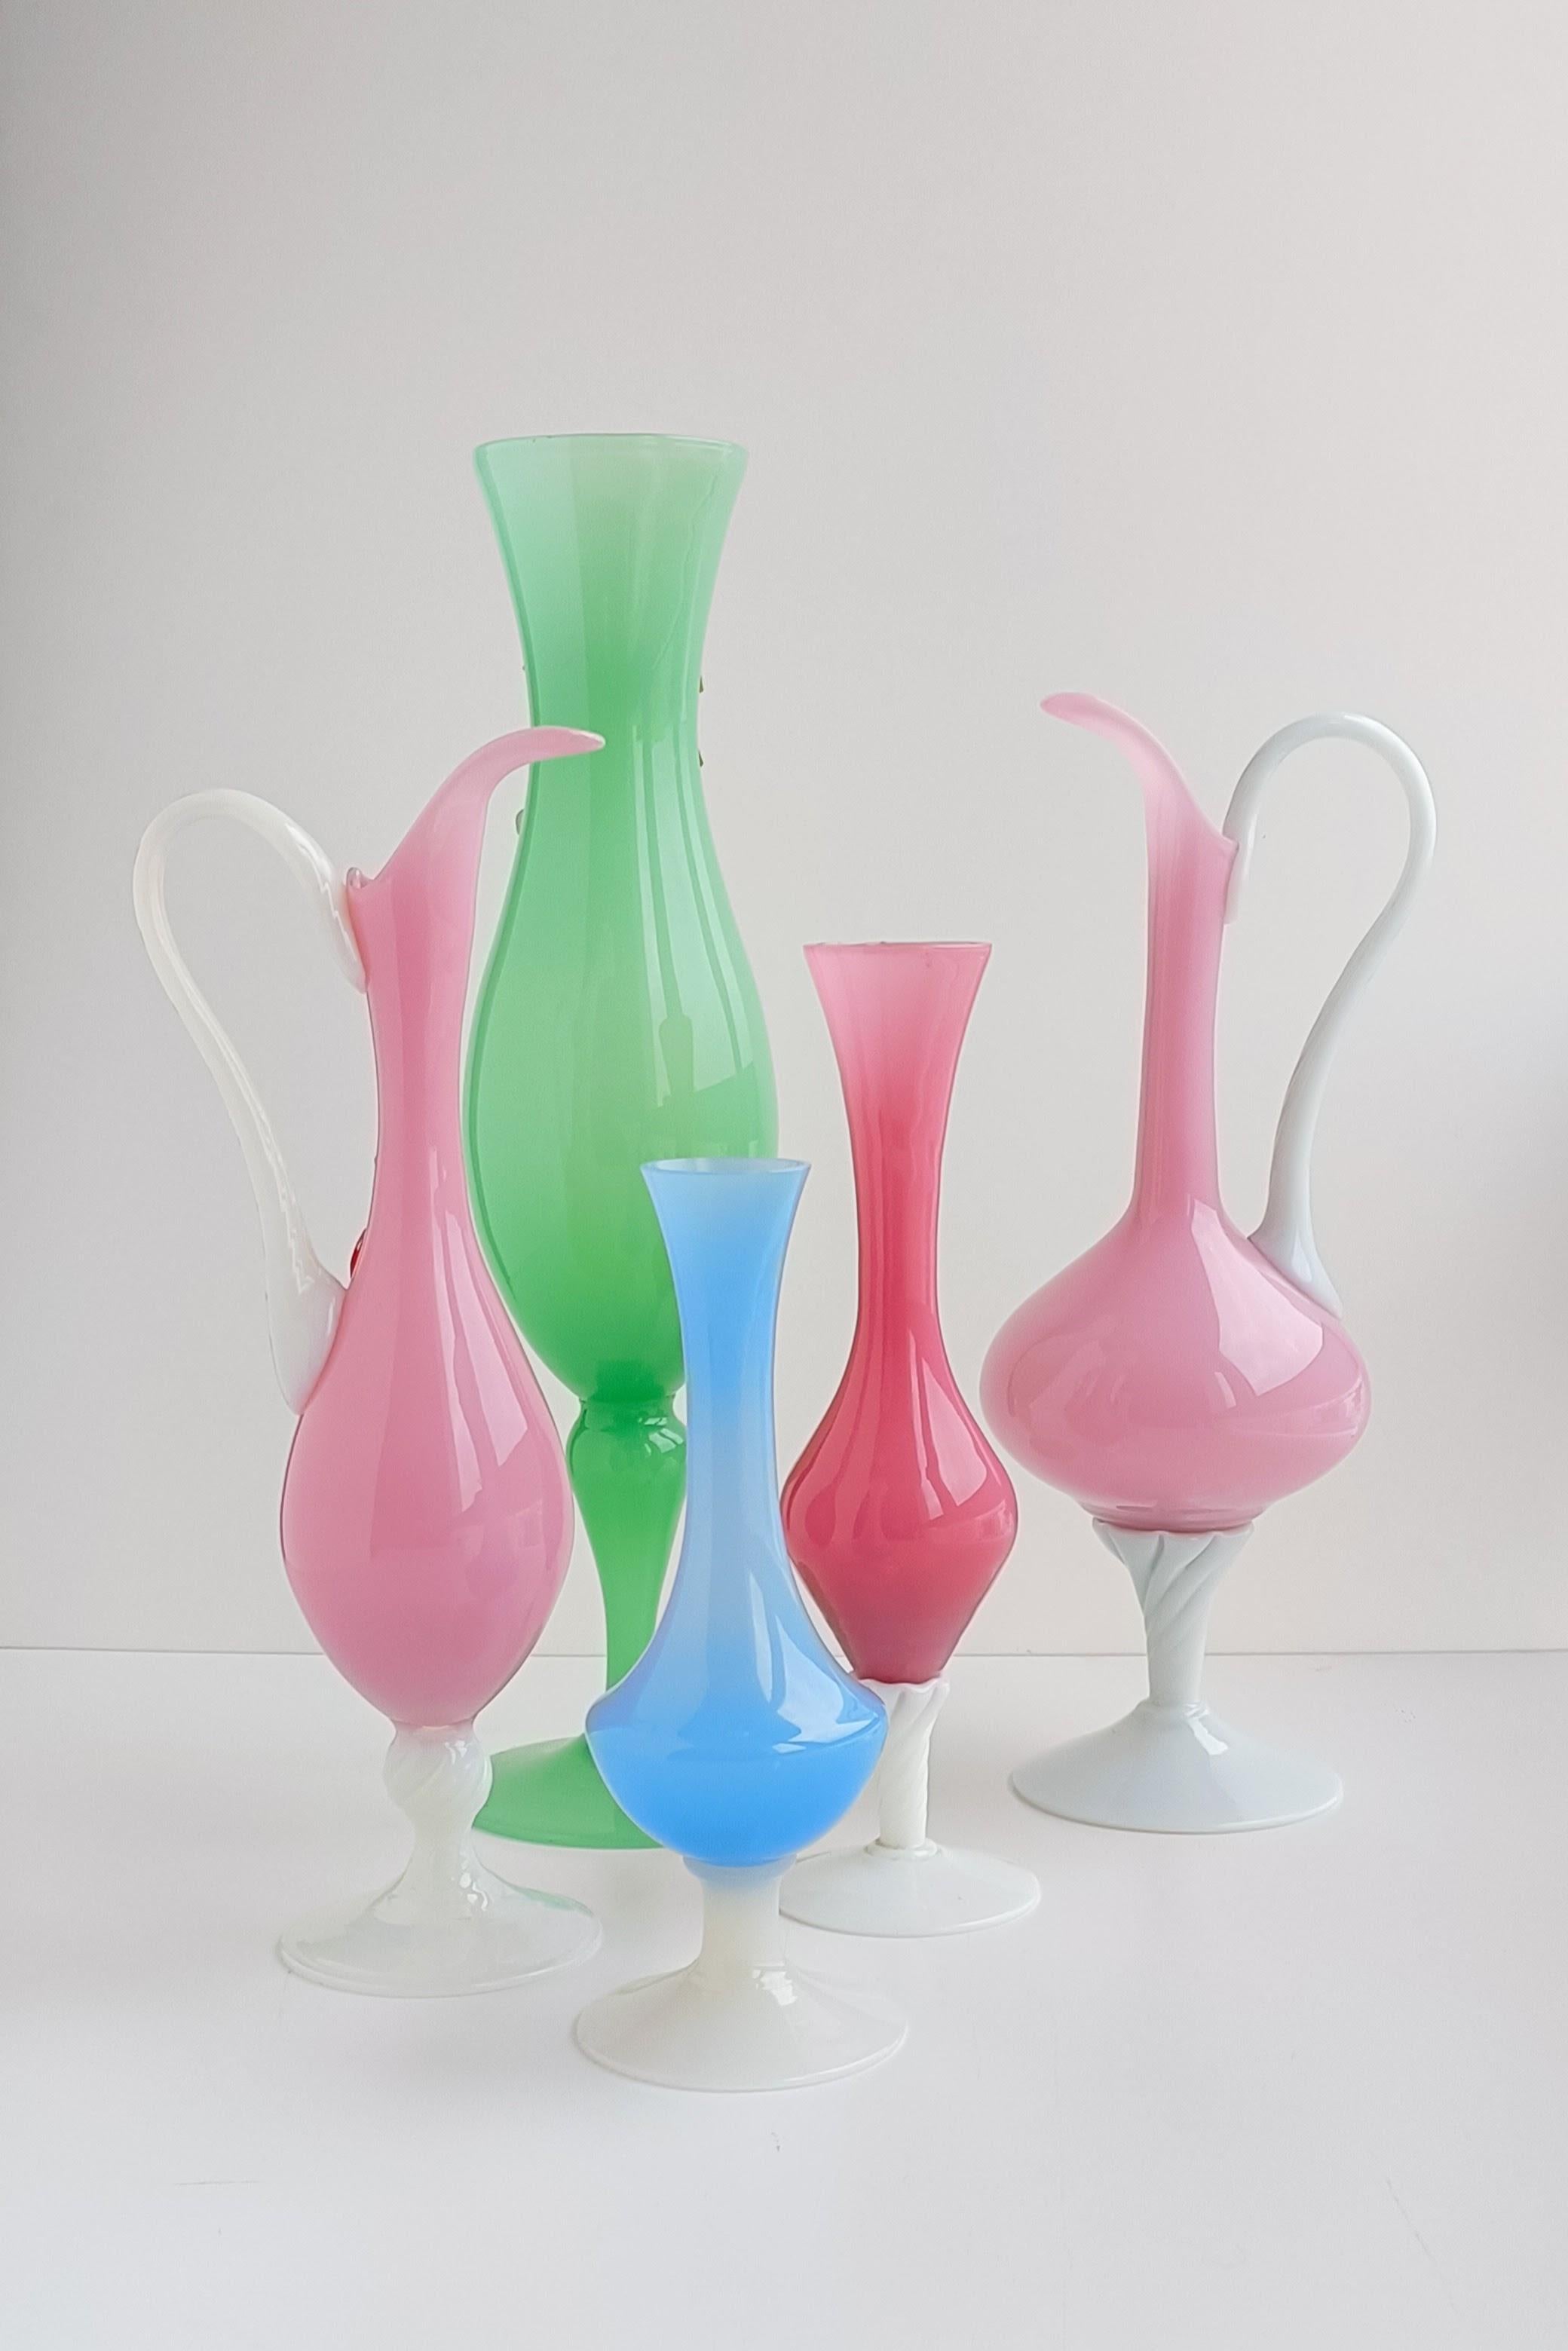 These Empoli Glass Opaline Florence set of Mid Century vases, handcrafted in Italy circa the 1950s, represent a beautiful example of vintage Italian glassware. Empoli, in Tuscany region, Italy, has a long tradition of glassmaking, and the Empoli